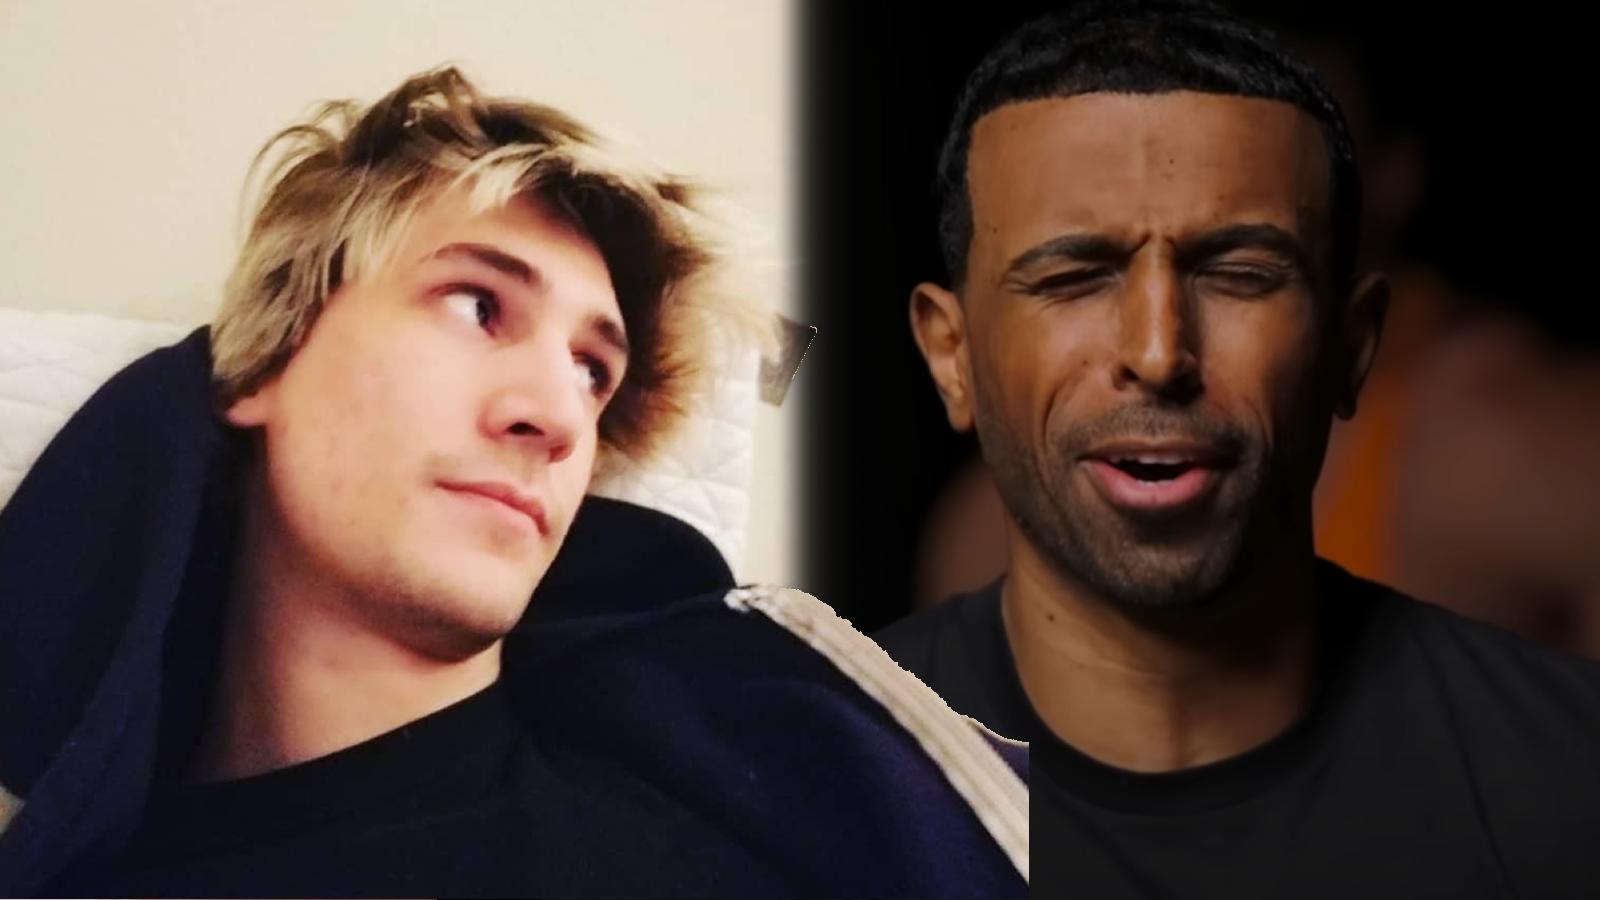 xQc and Myron from Fresh & Fit